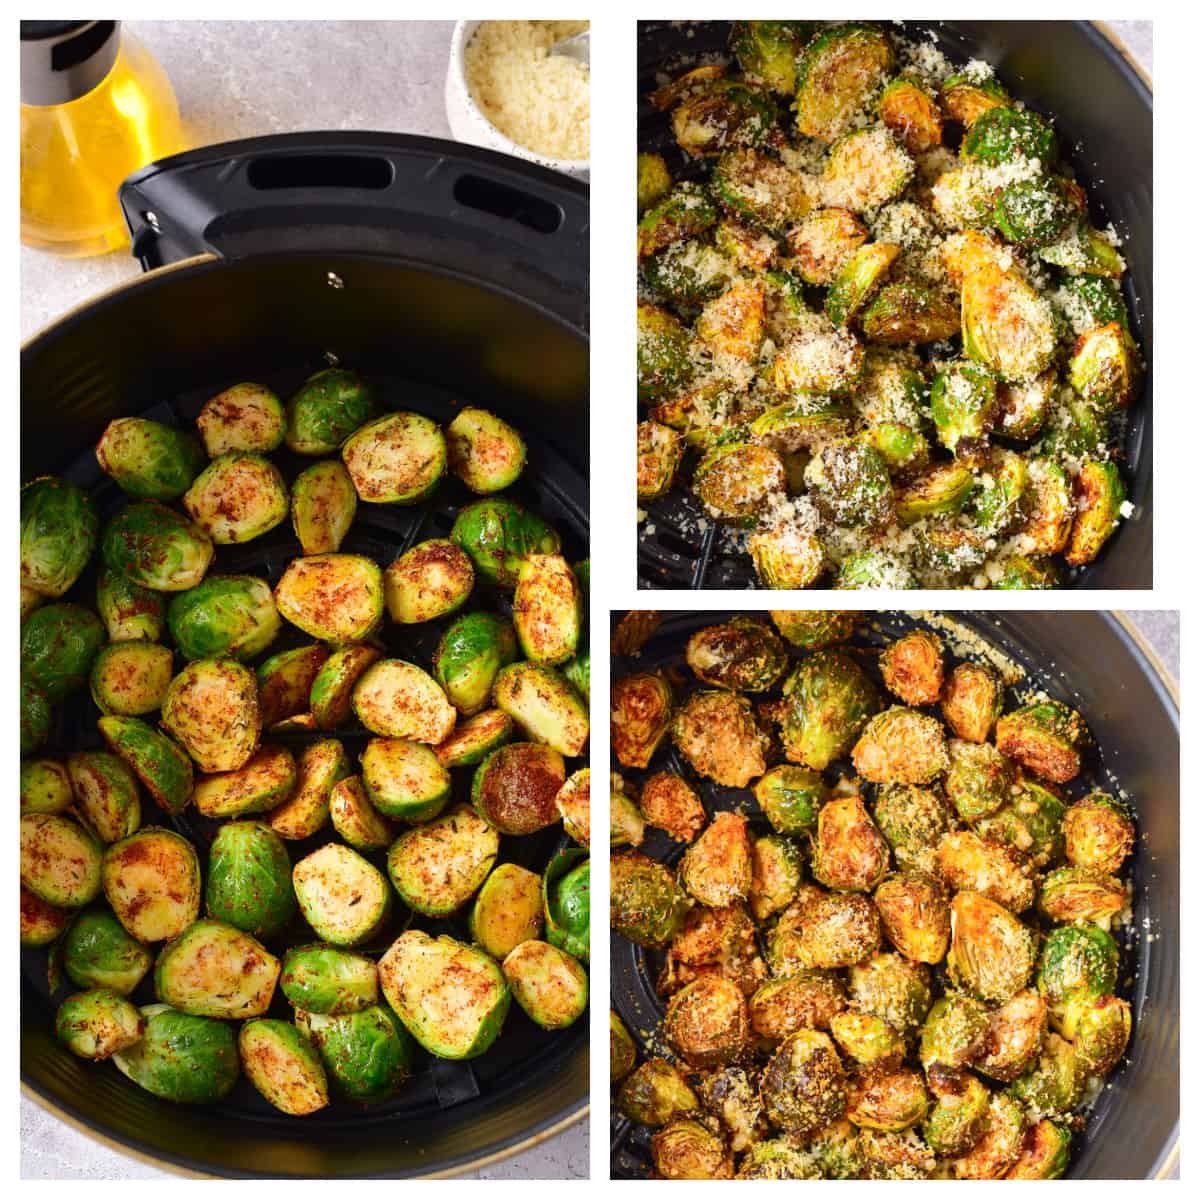 Collage of roasting brussels sprouts.